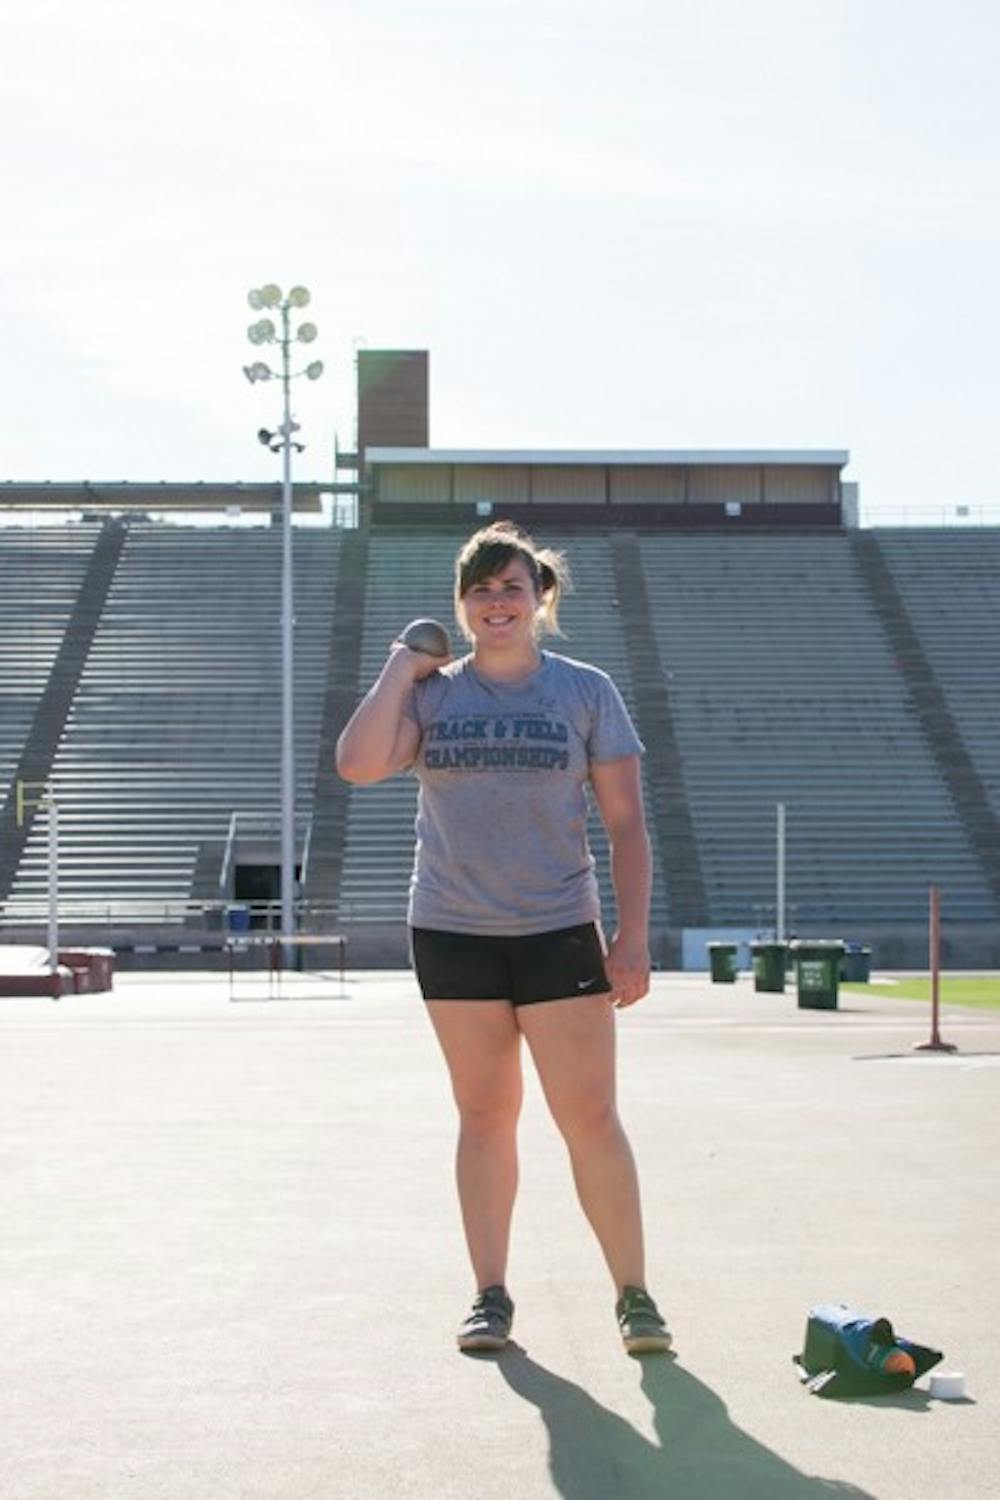 Redshirt senior Anna Jelmini poses for a photograph after a practice in Tempe at Sun Angel Stadium on April 8. Jelmini took home an award for outstanding female NCAA student-athlete at the 2014 Pitchfork Awards. (Photo by Andrew Ybanez)